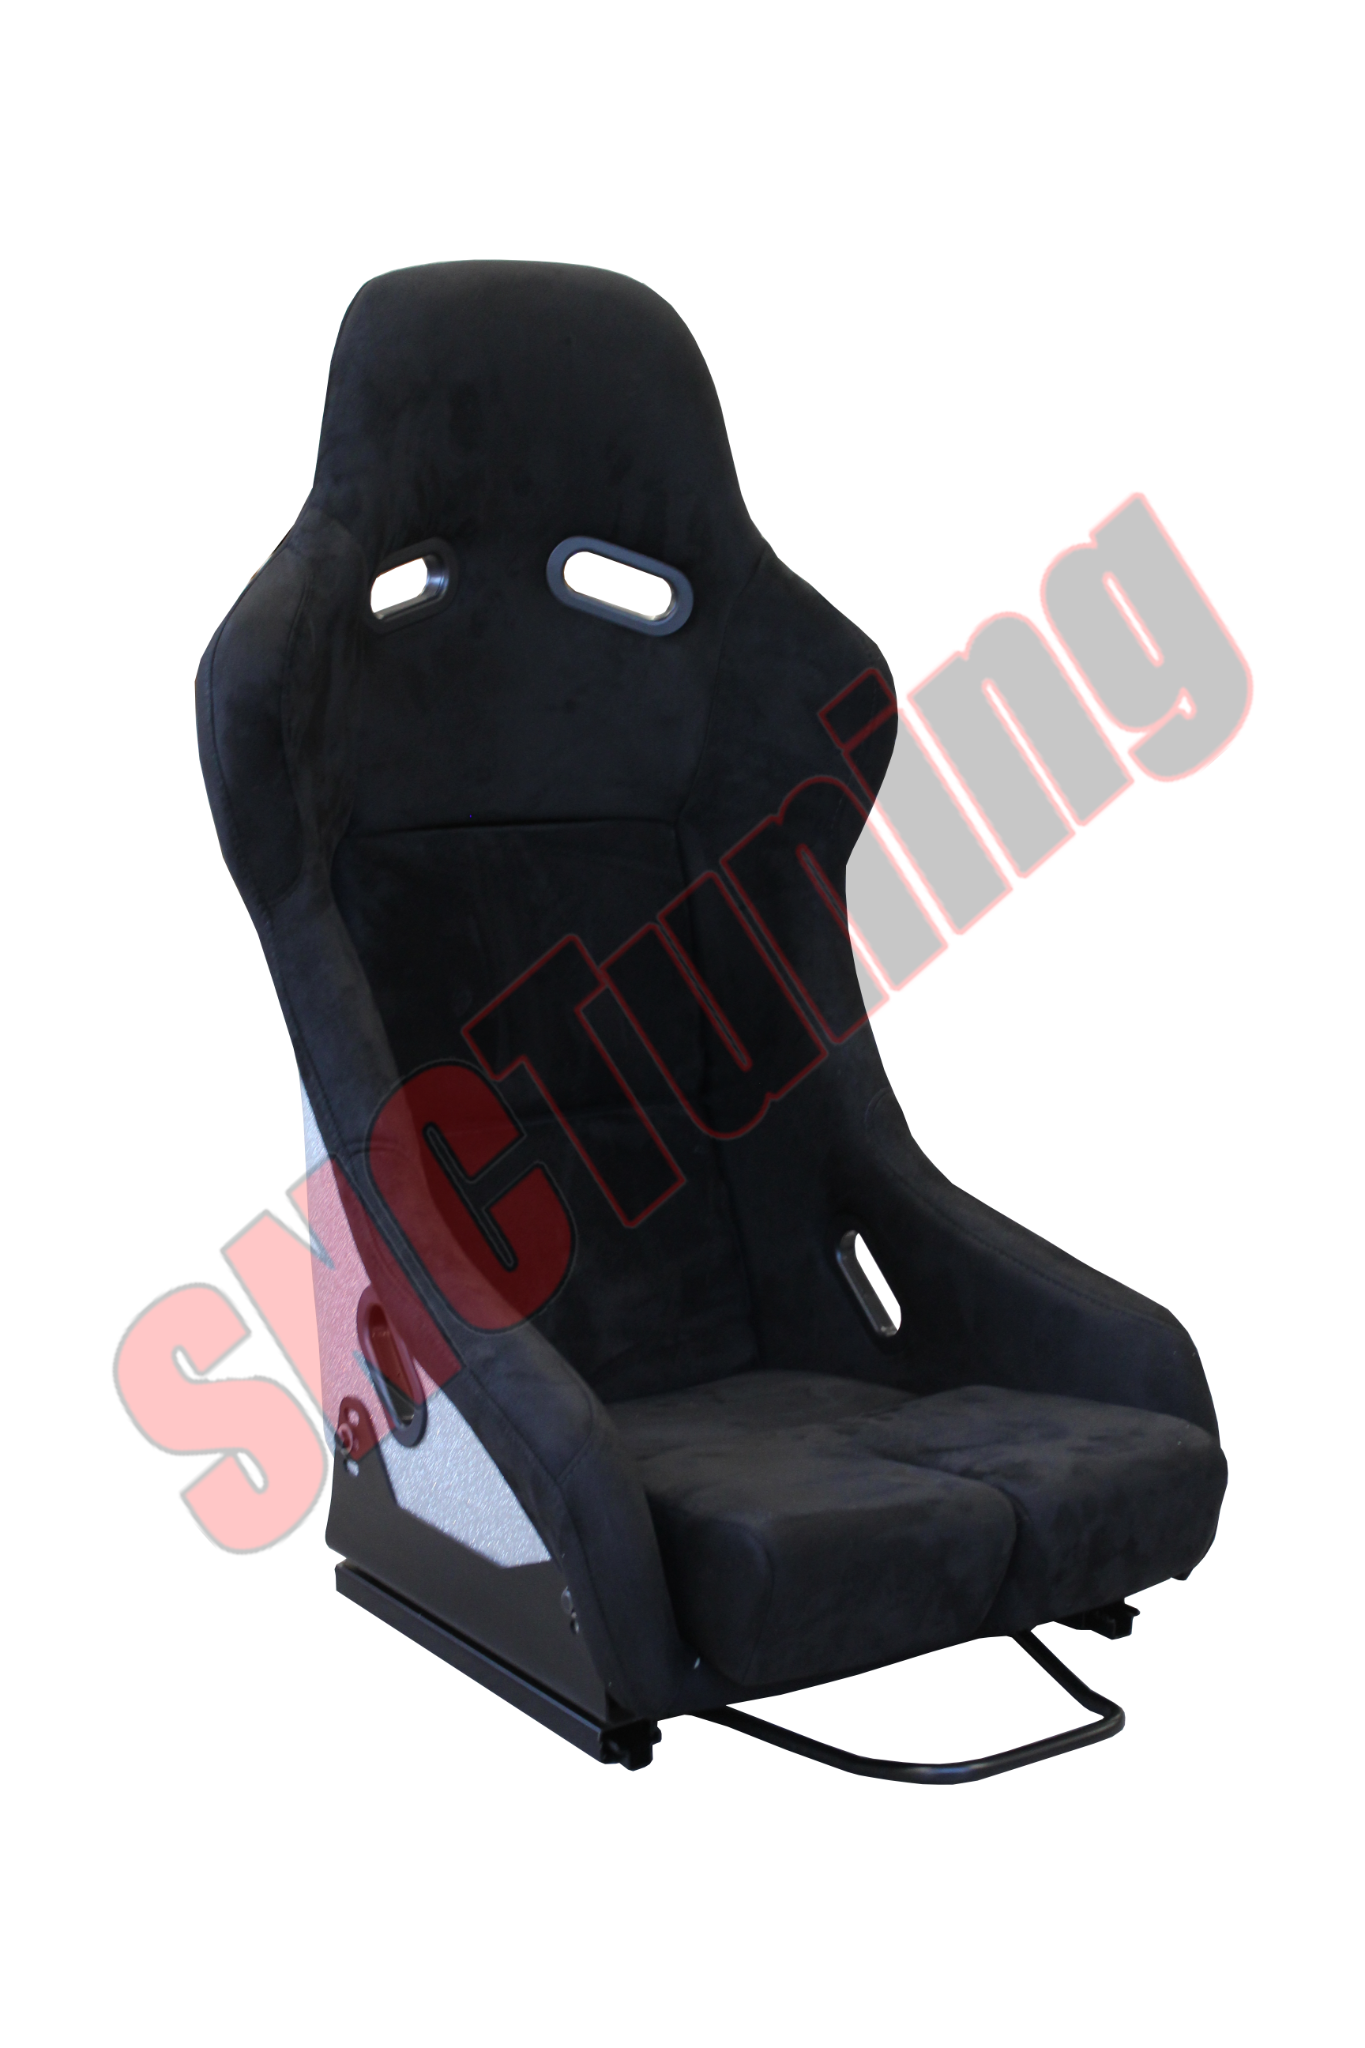 SNC Tuning VS3 Full Bucket Racing Seat Black - Suede Silver Sparkle Shell (Large)